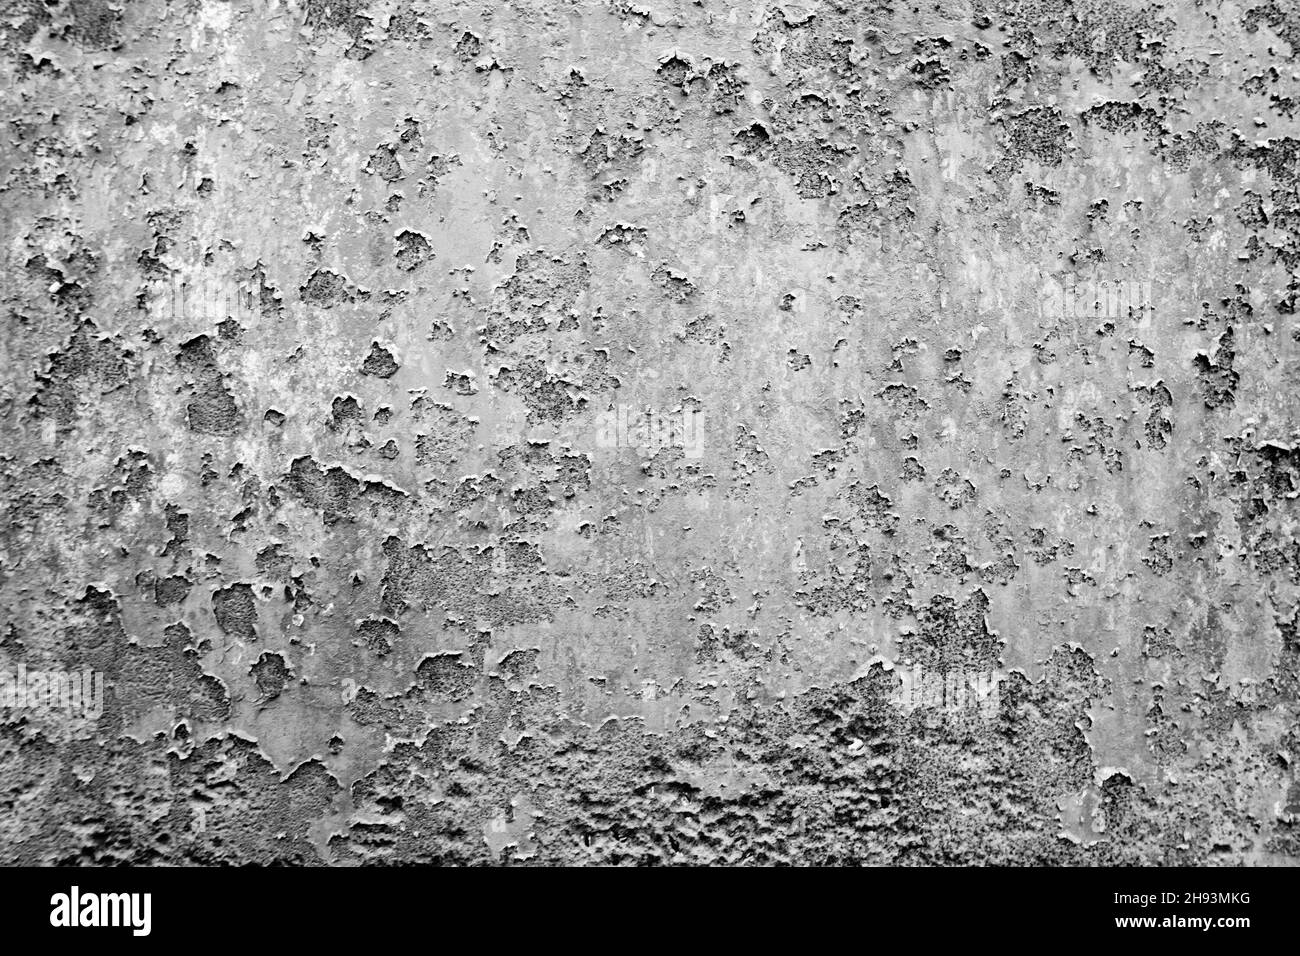 Rusty board, abstract texture black and white stock image, India Stock Photo